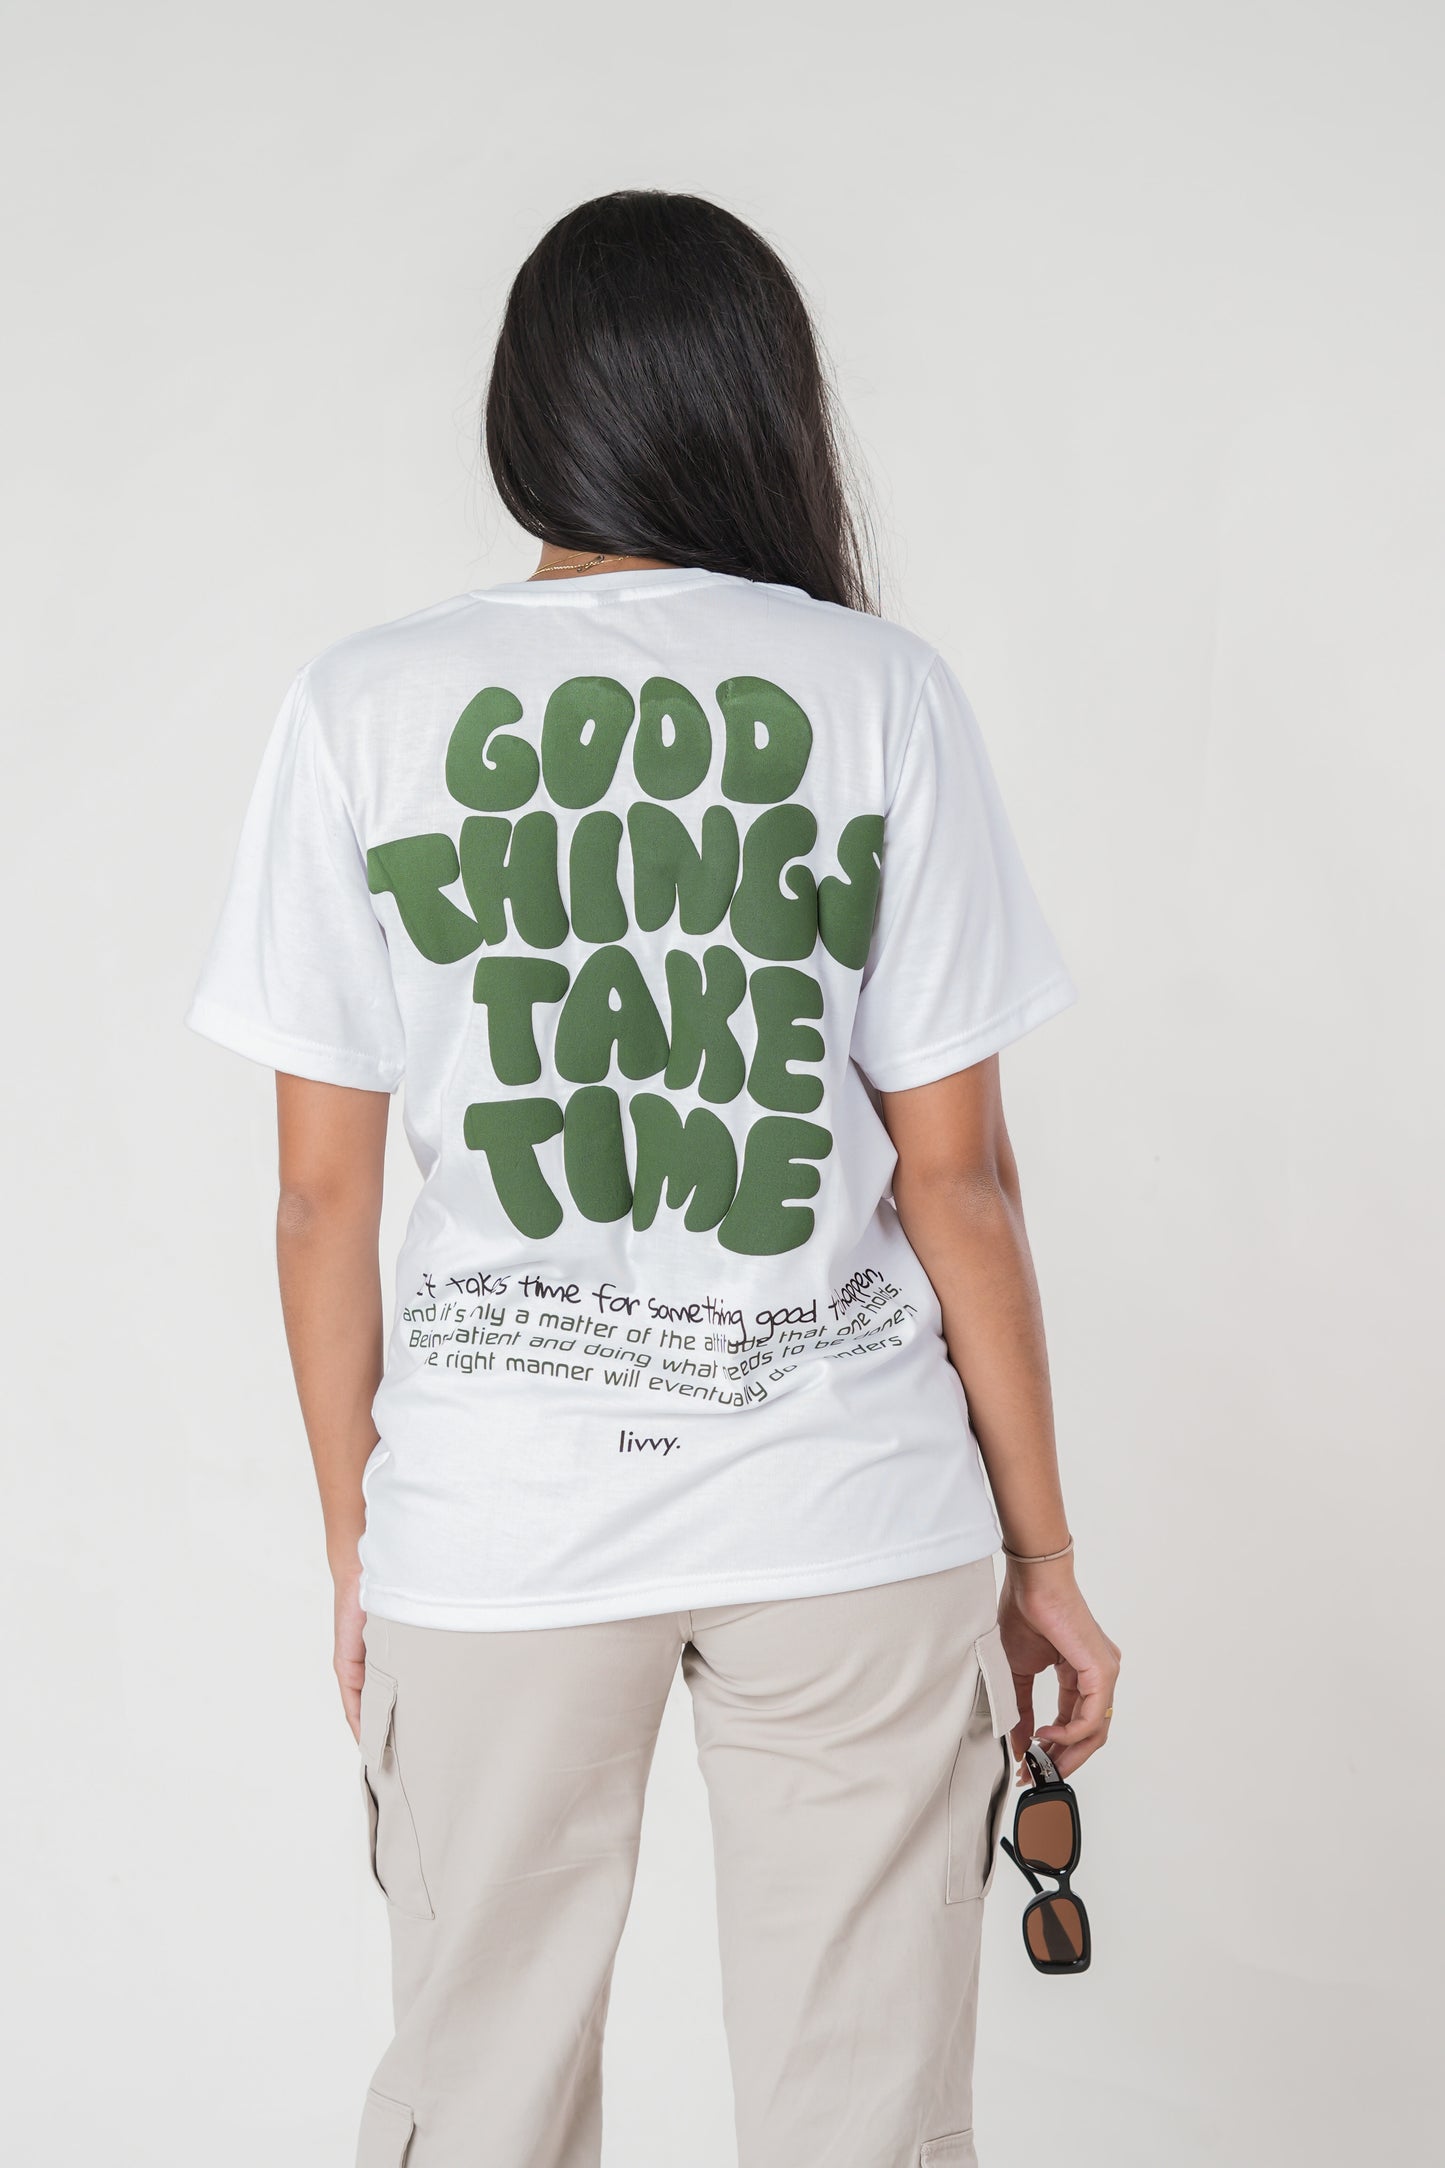 The Good things take time puff print tee- USE CODE "BANK15" TO GET  15% OFF